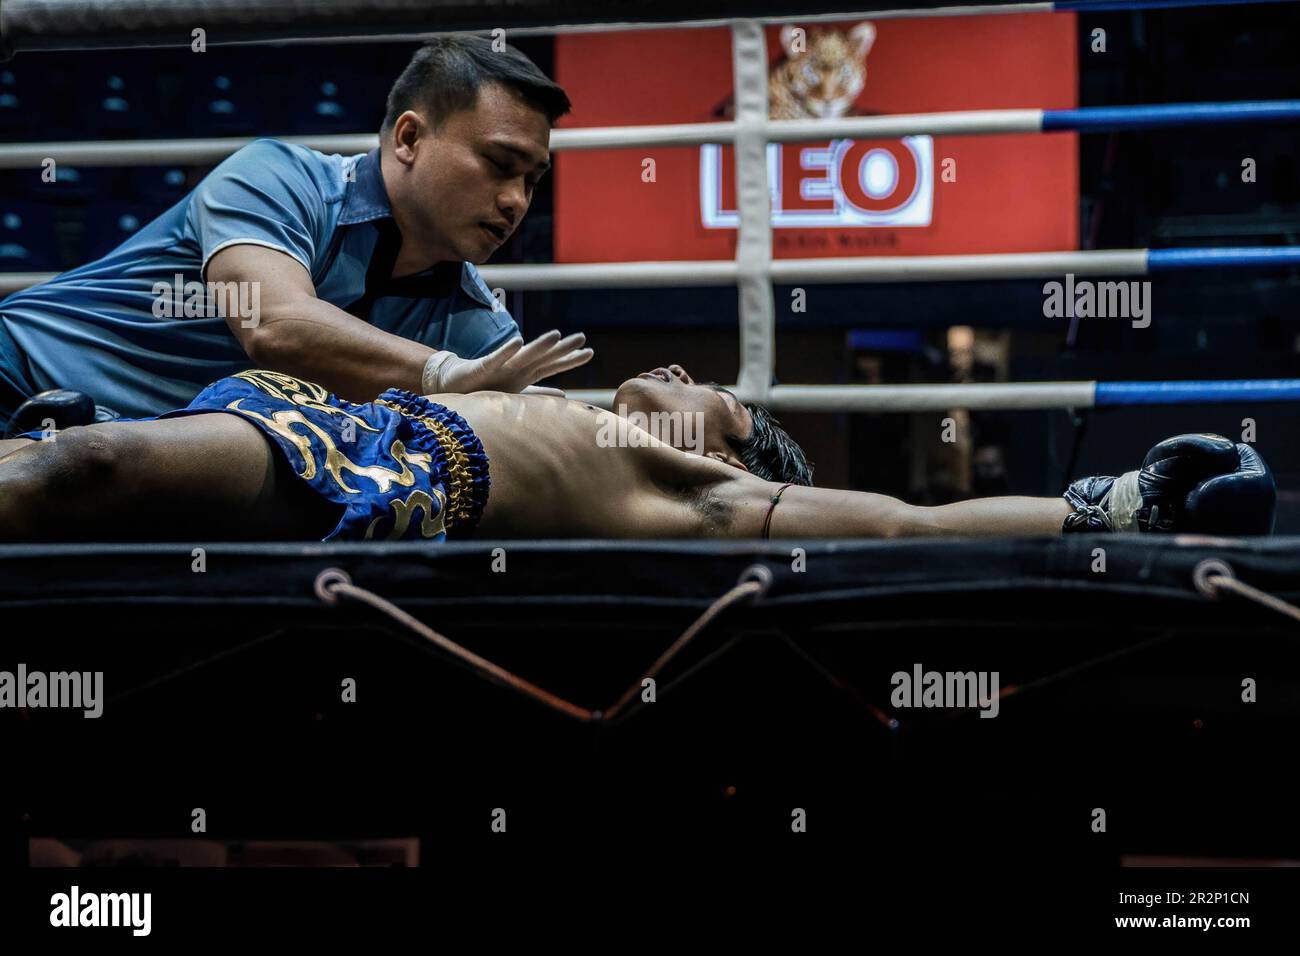 A referee seen counting out after a Muay Thai boxer is knocked down, at Bangkok's Rajadamnern stadium. Muay Thai fights at Thailand’s iconic boxing Rajadamnern stadium, the dream stage for competitors and it is favourite for combat sports all over the world. Stock Photo